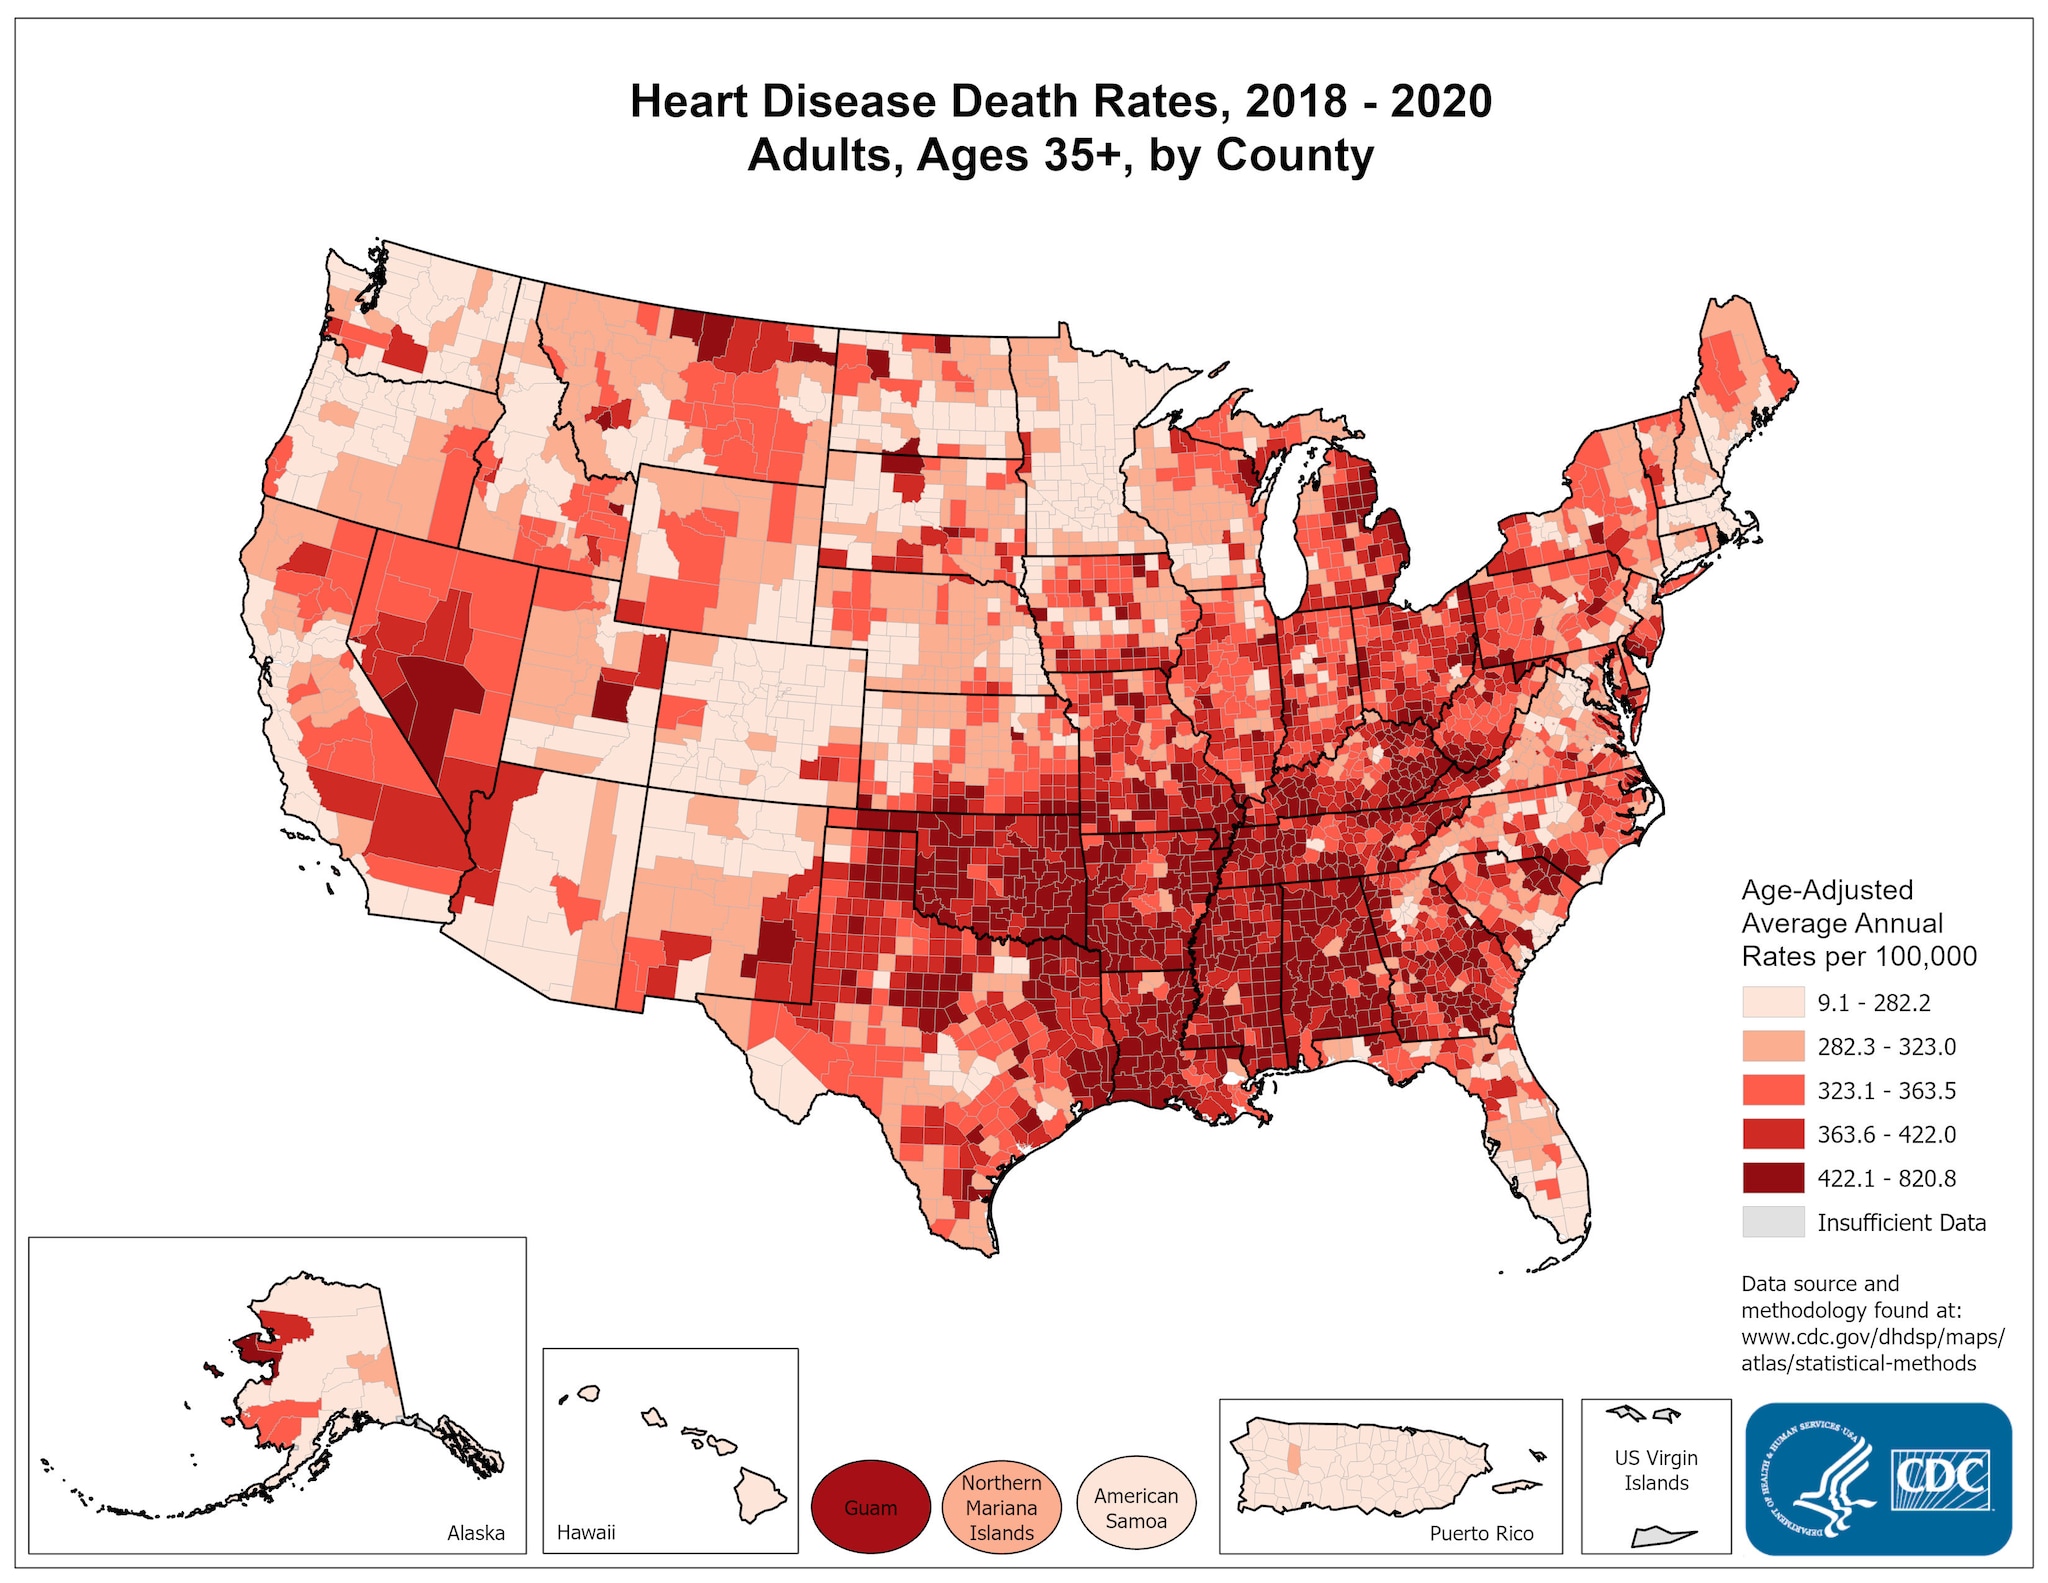 Heart Disease Death Rates for 2017-2019 for Adults Aged 35 Years and Older by County